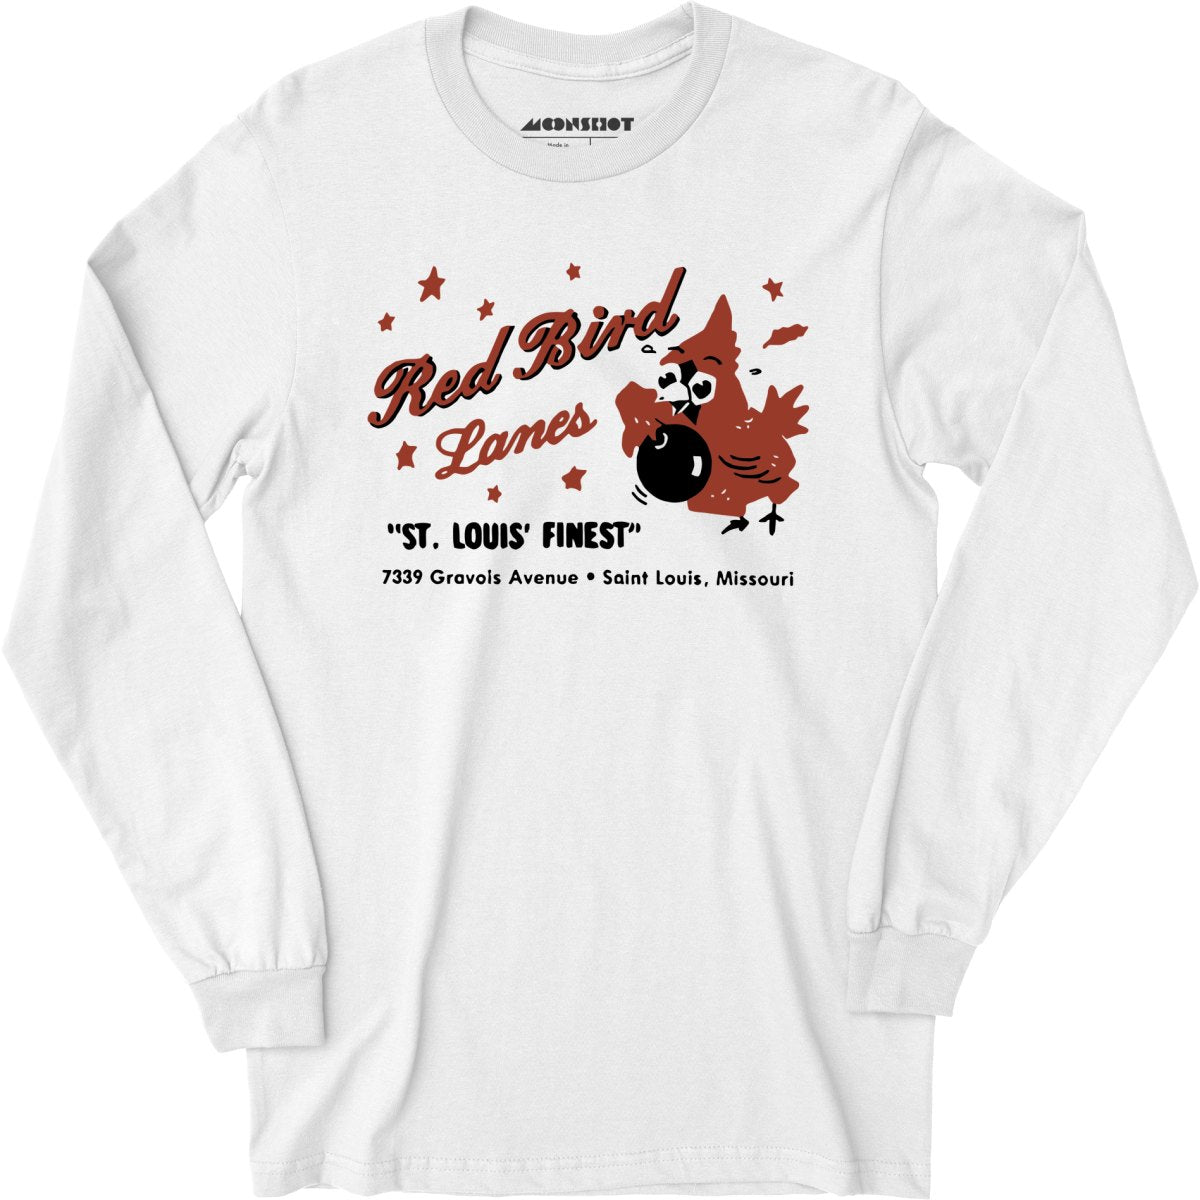 Red Bird Lanes v1 - St. Louis, MO - Vintage Bowling Alley - Long Sleeve T-Shirt